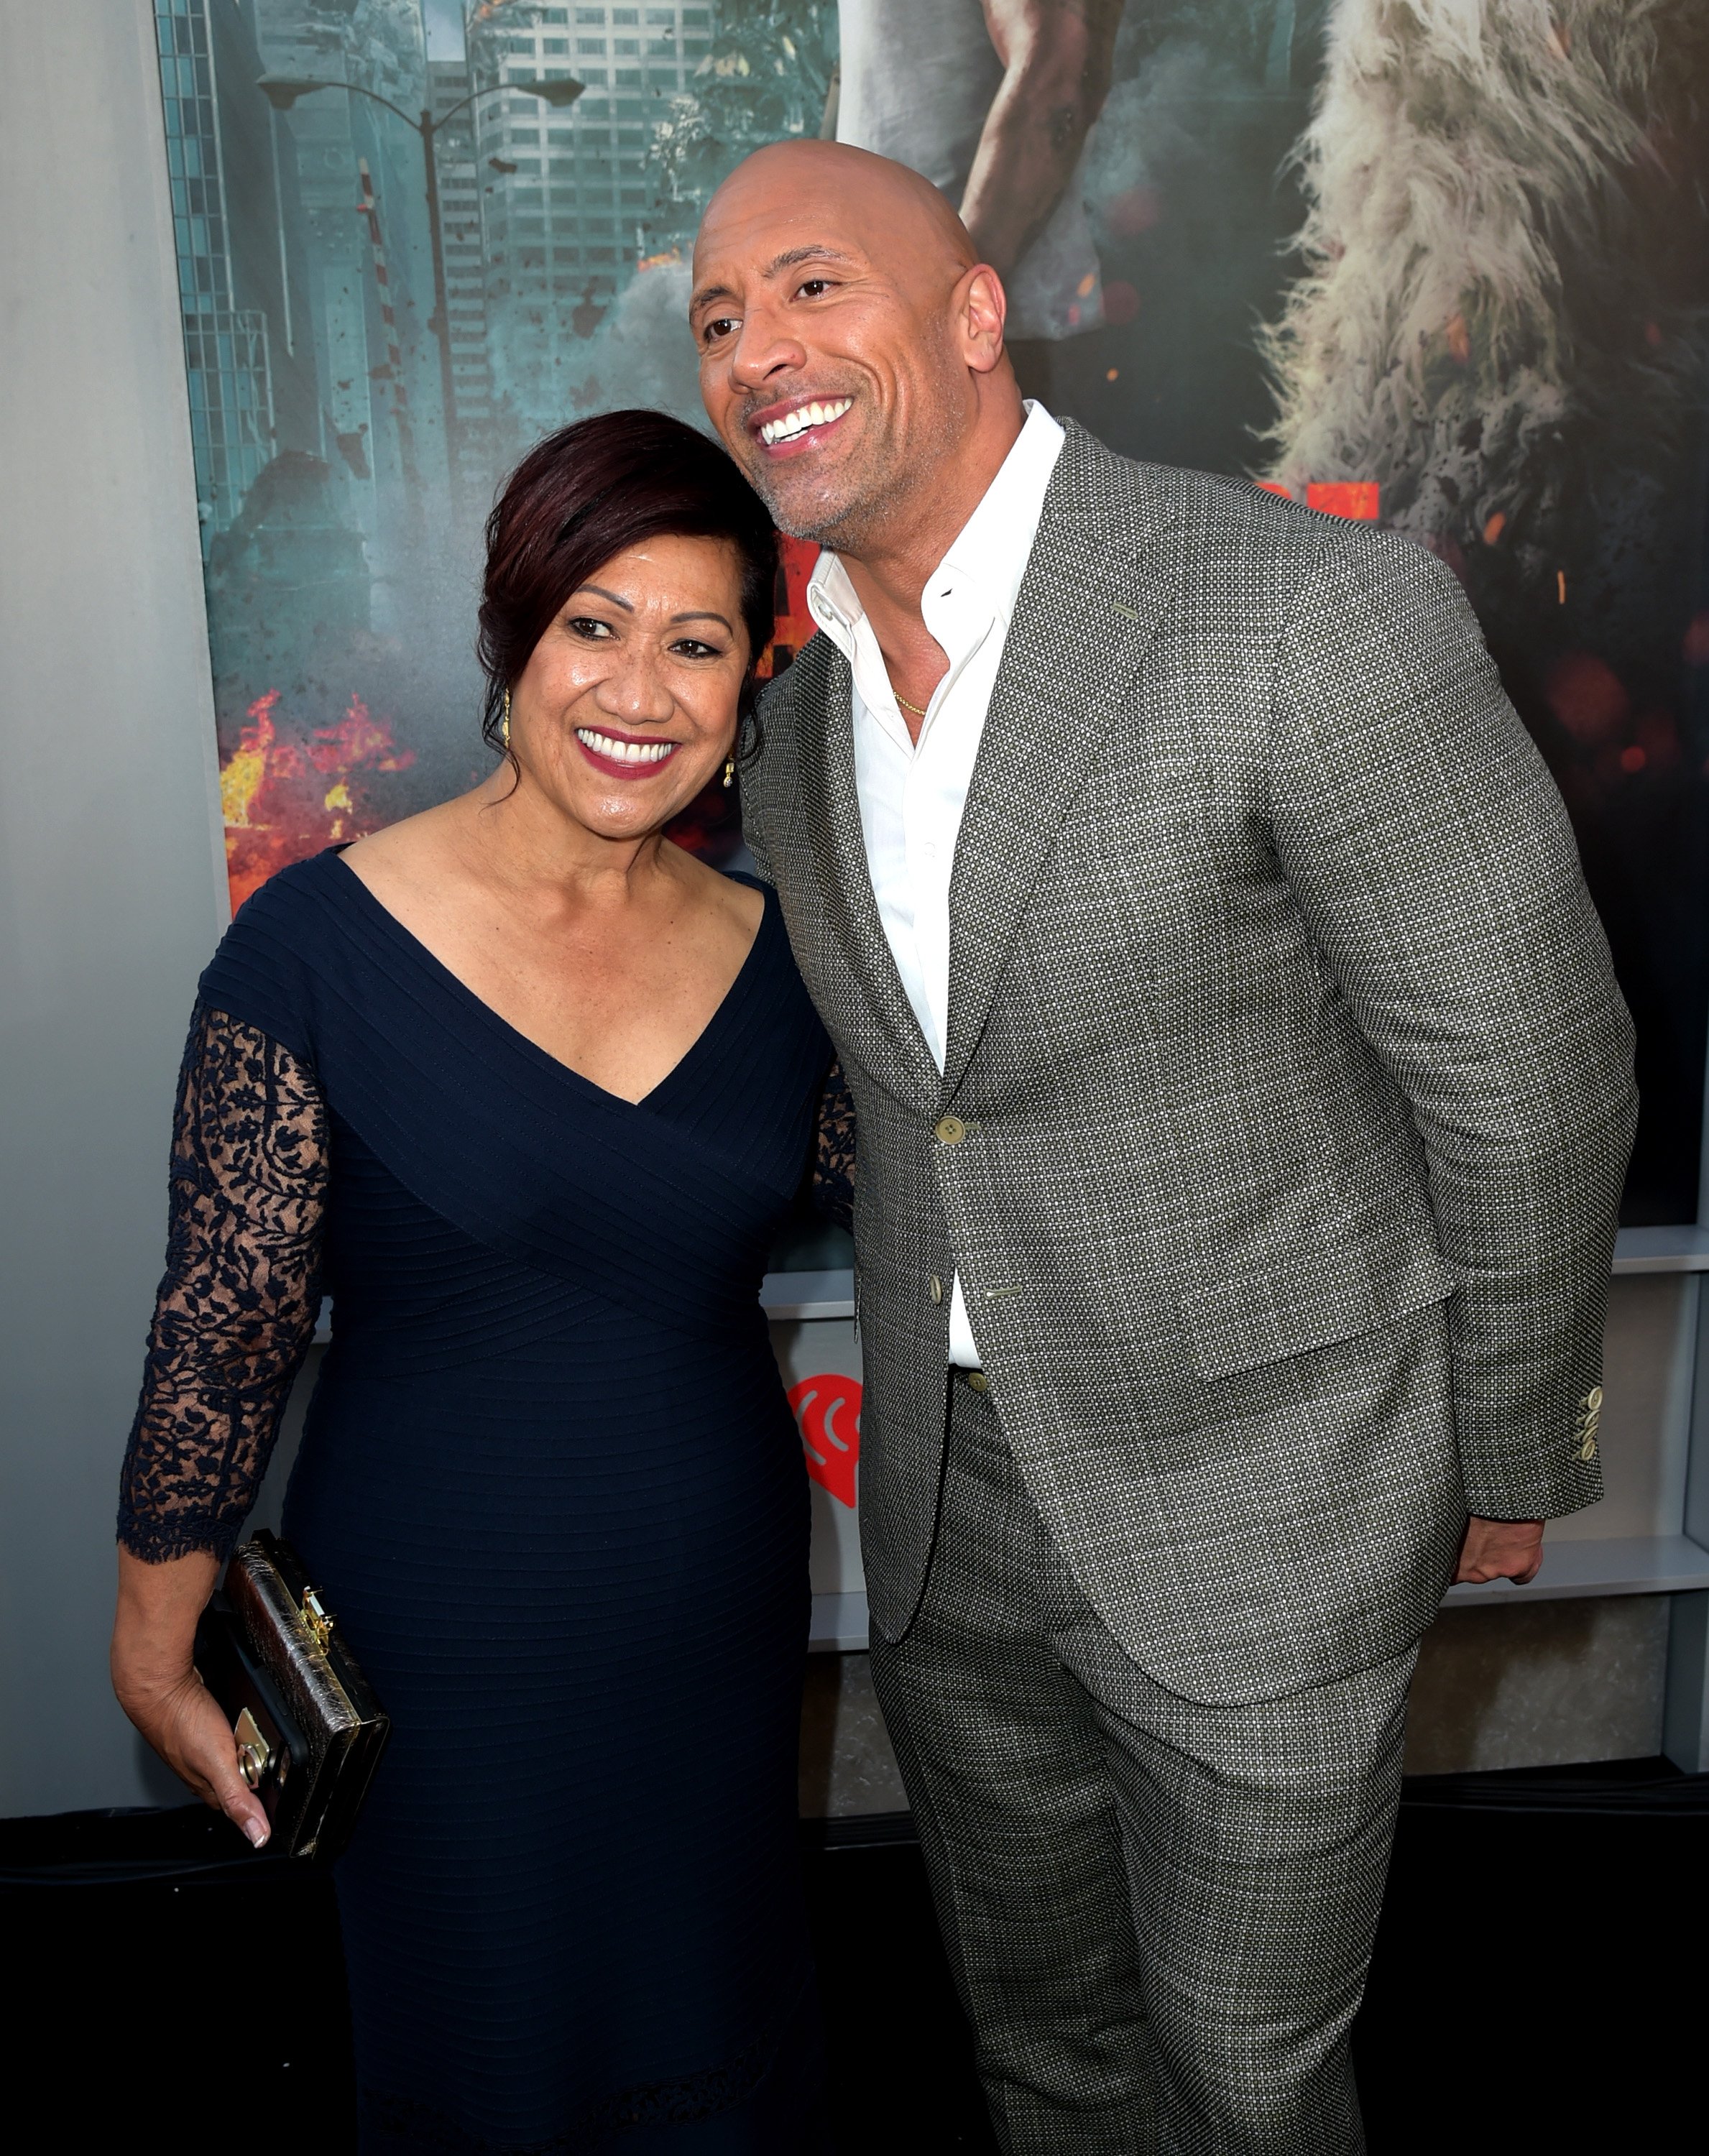 Actor Dwayne Johnson (R) and his mother, Ata Johnson, arrive at the premiere of Warner Bros. Pictures' "Rampage" at the Microsoft Theatre on April 4, 2018 in Los Angeles, California. | Source: Getty Images